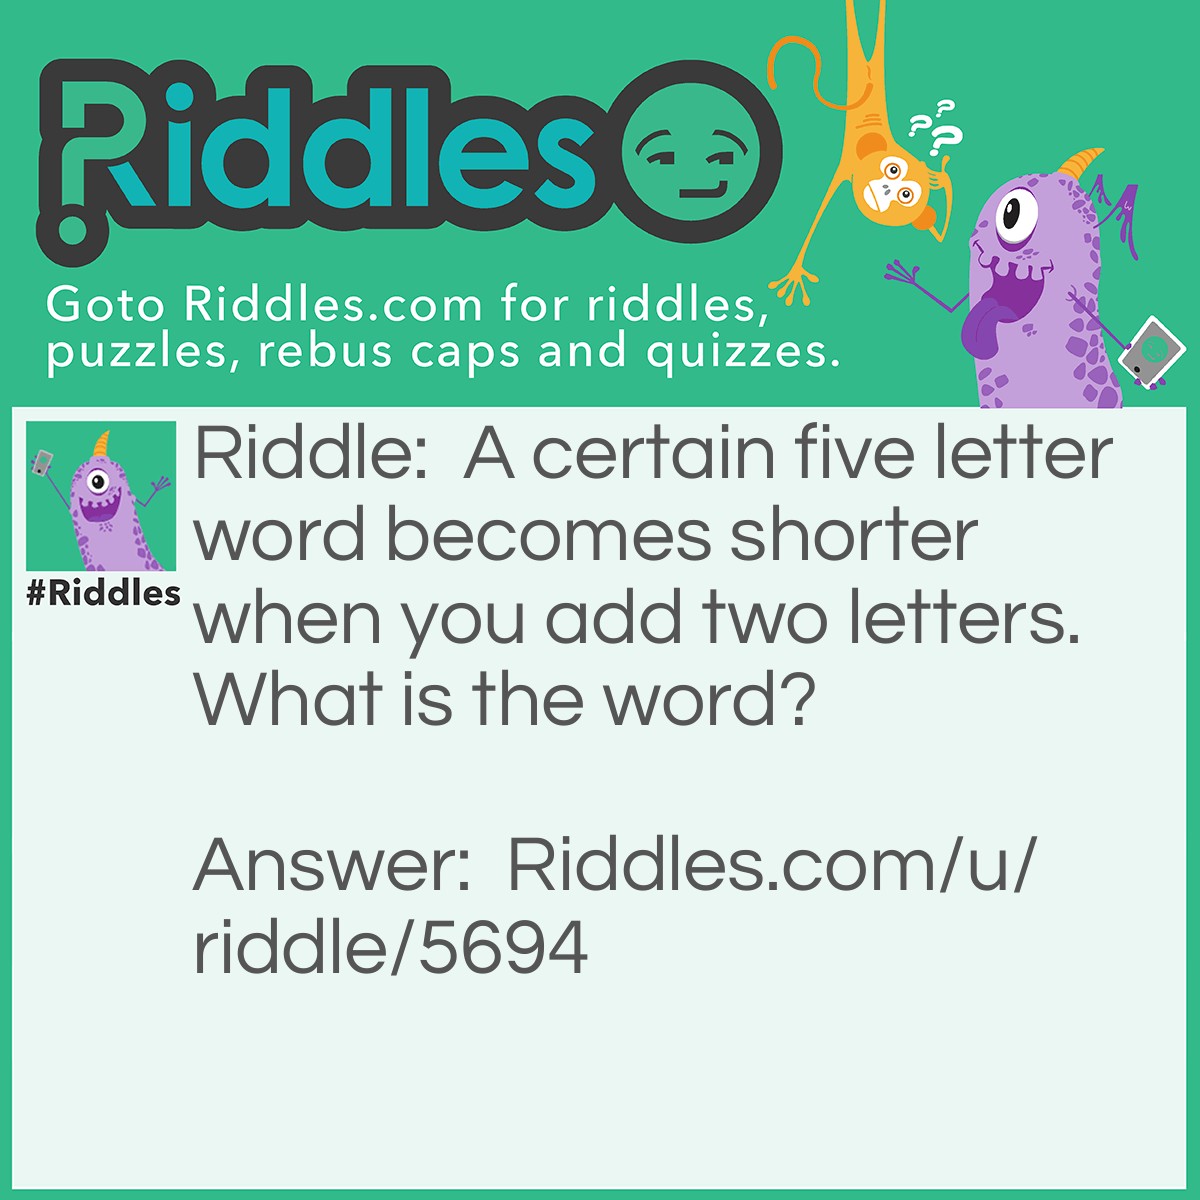 Riddle: A certain five letter word becomes shorter when you add two letters. What is the word? Answer: Short.